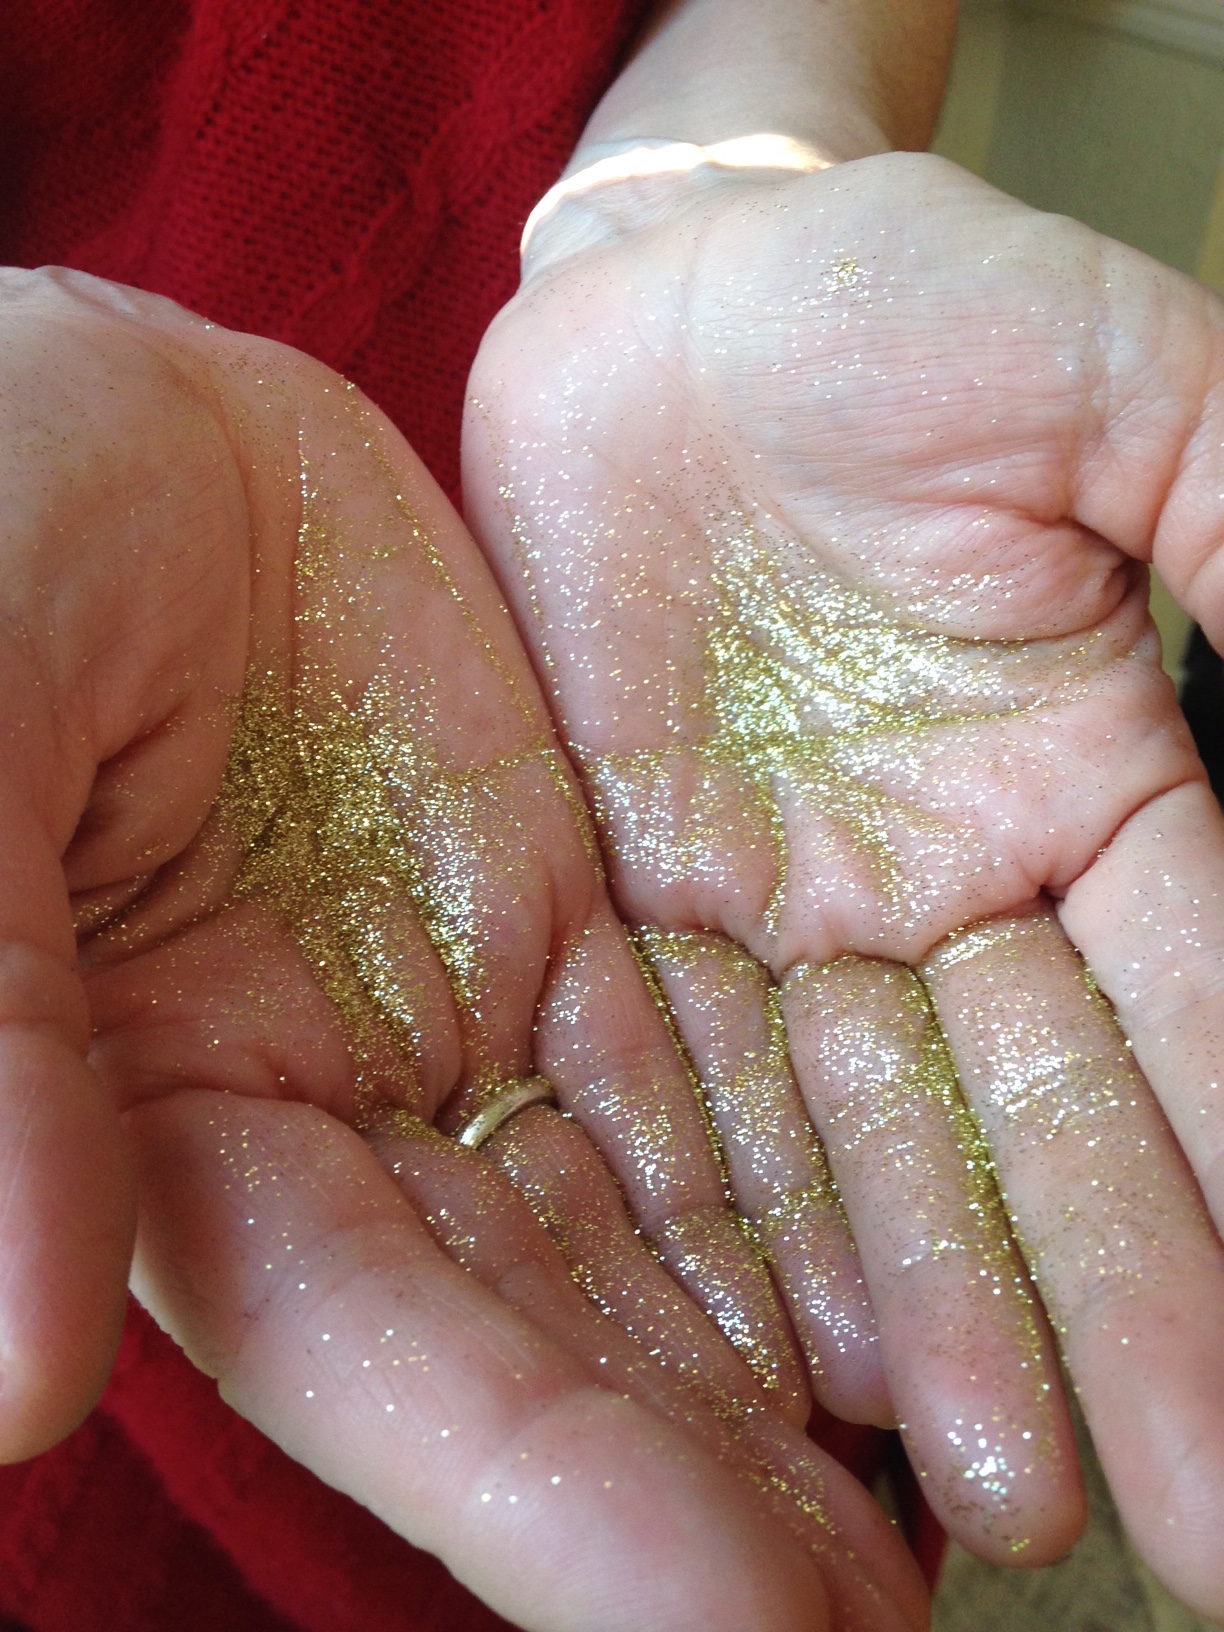 Great feedback is like gold dust. Be generous with yours